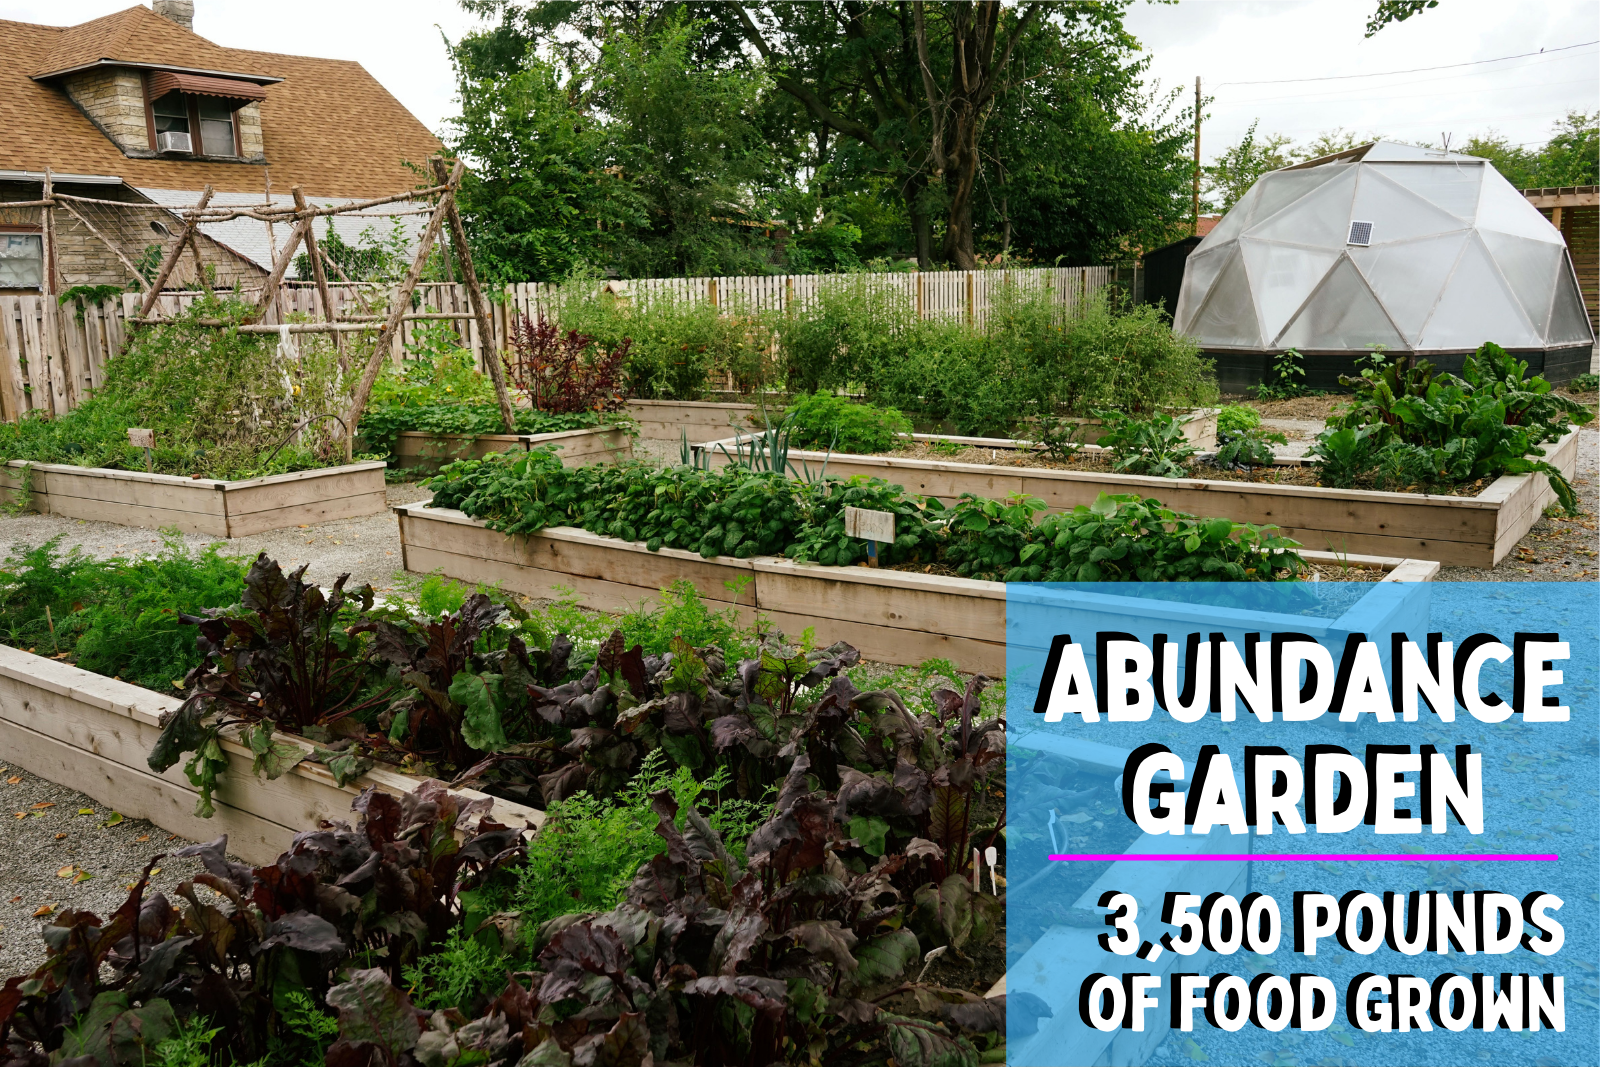 Abundance Garden 3500 pounds of food grown photo of abundance garden in full bloom with beds full of greens